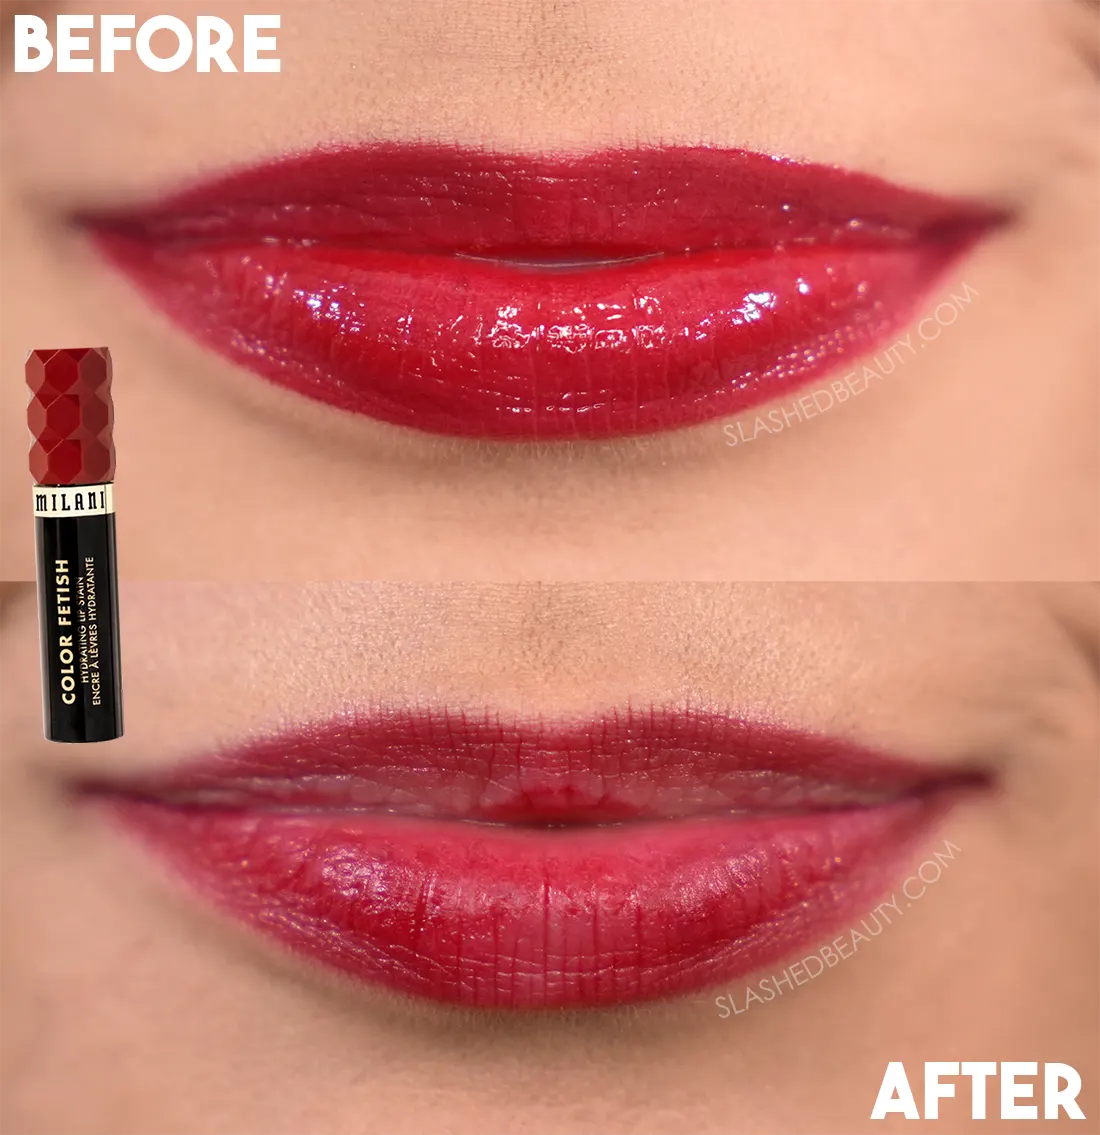 Before and after 8 hours: Milani Hydrating Color Fetish Lip Stain in That's Fire Swatch | Slashed Beauty